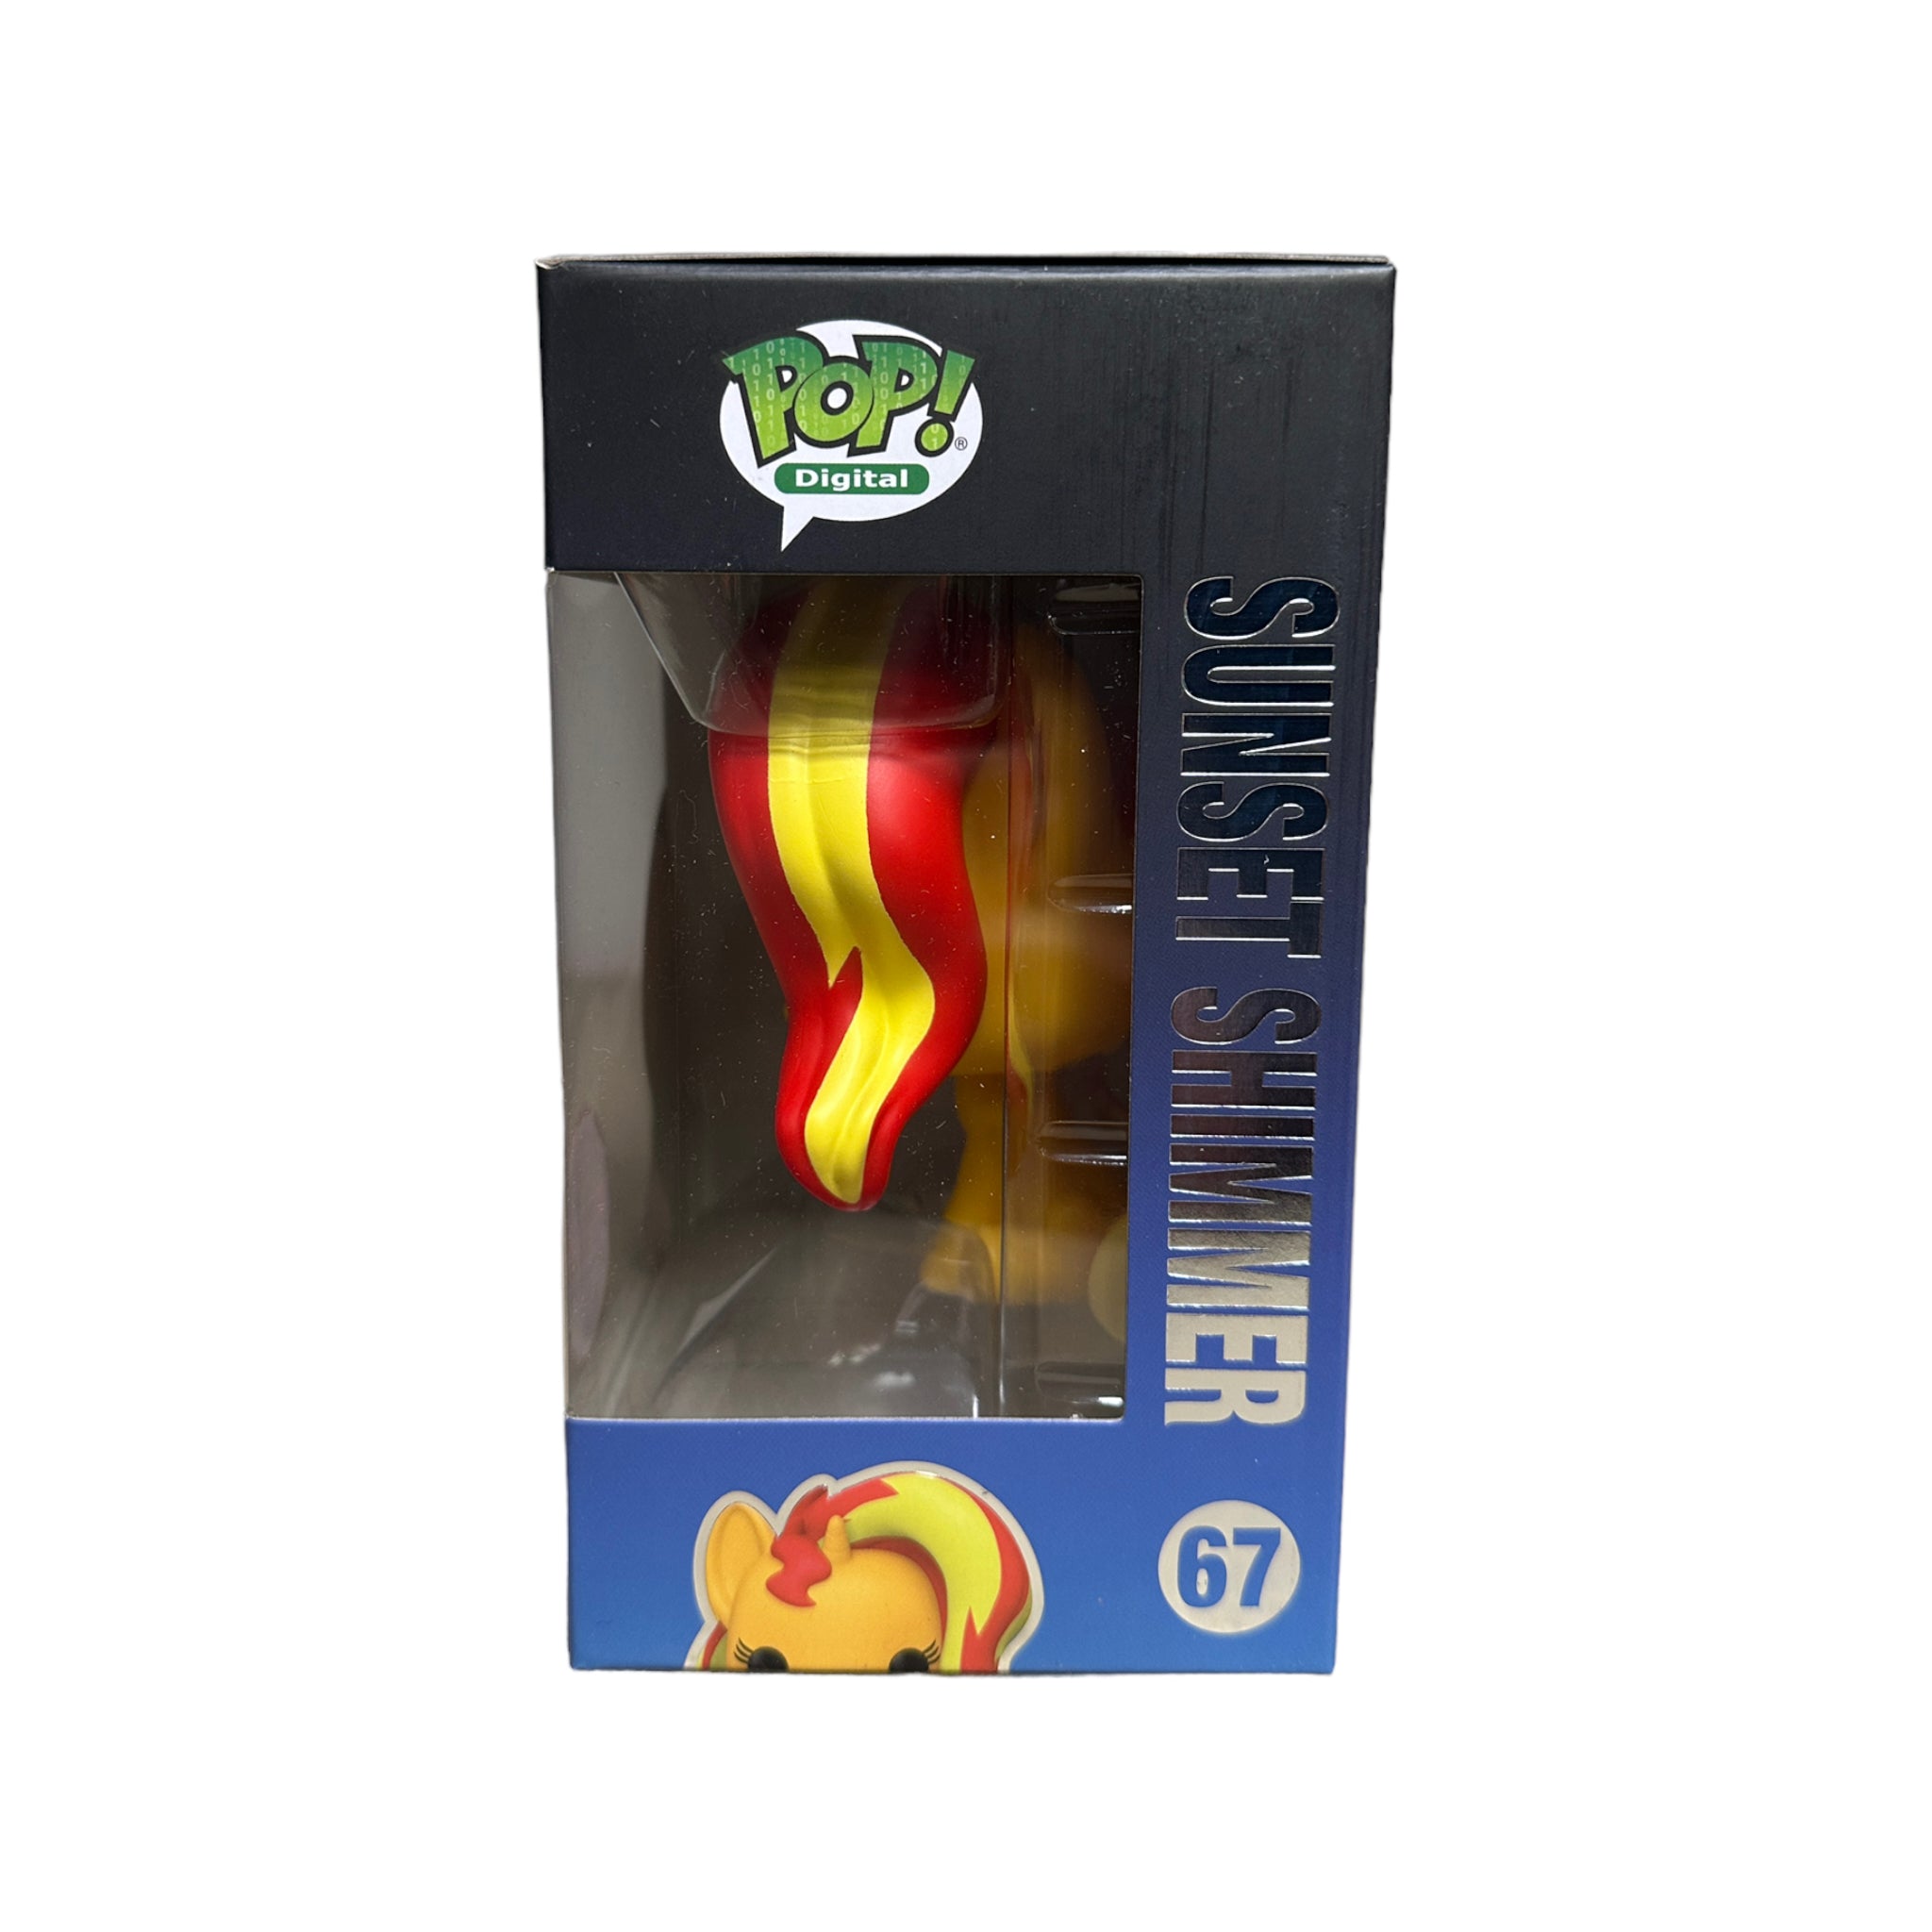 Sunset Shimmer #67 Funko Pop! - My Little Pony - NFT Release Exclusive LE1550 Pcs - Condition 9.5/10